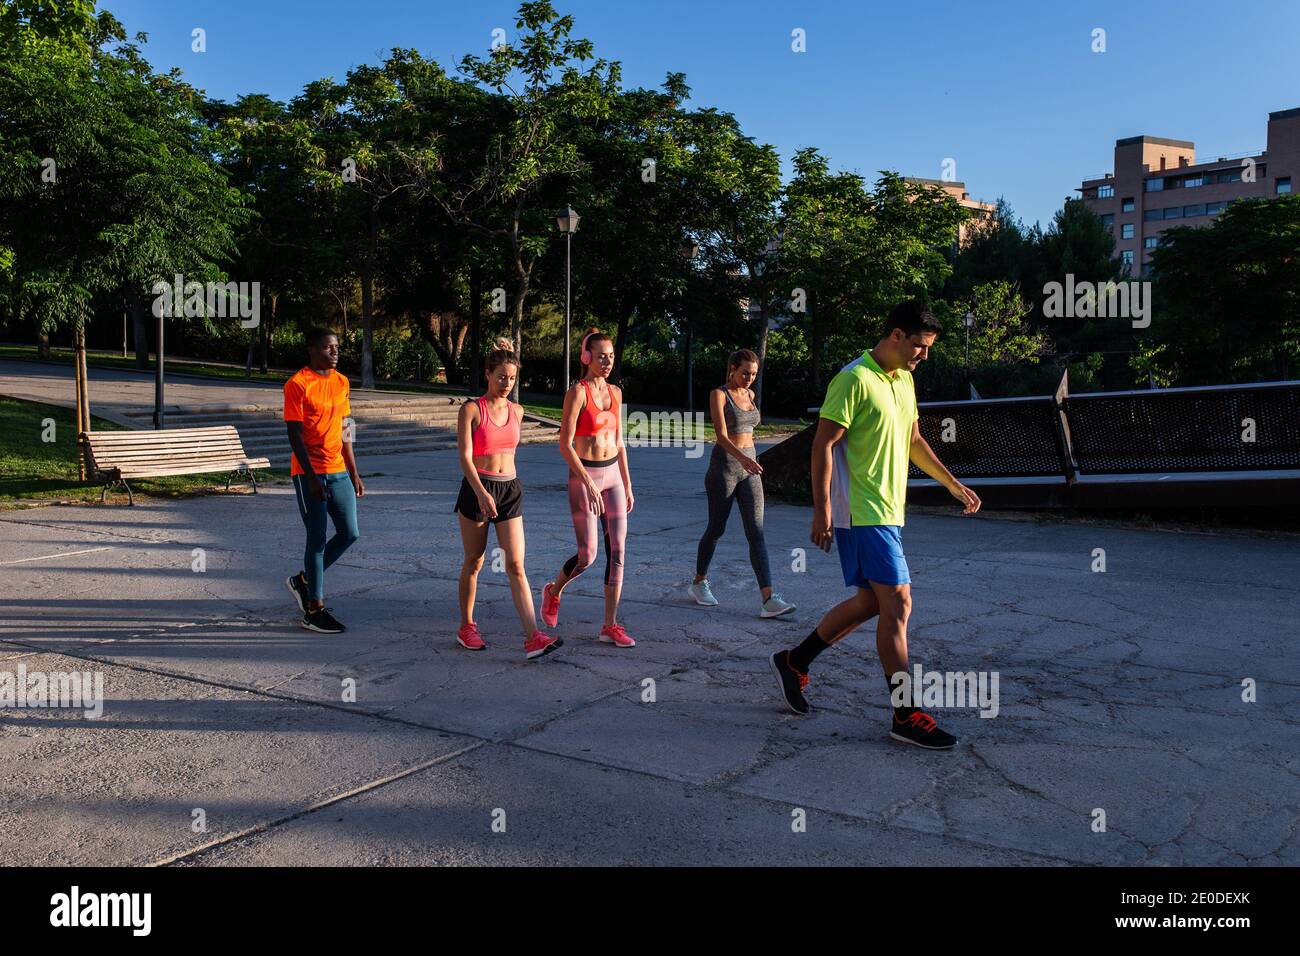 Company of diverse runners in sportswear walking together in city on sunny day after intense training Stock Photo